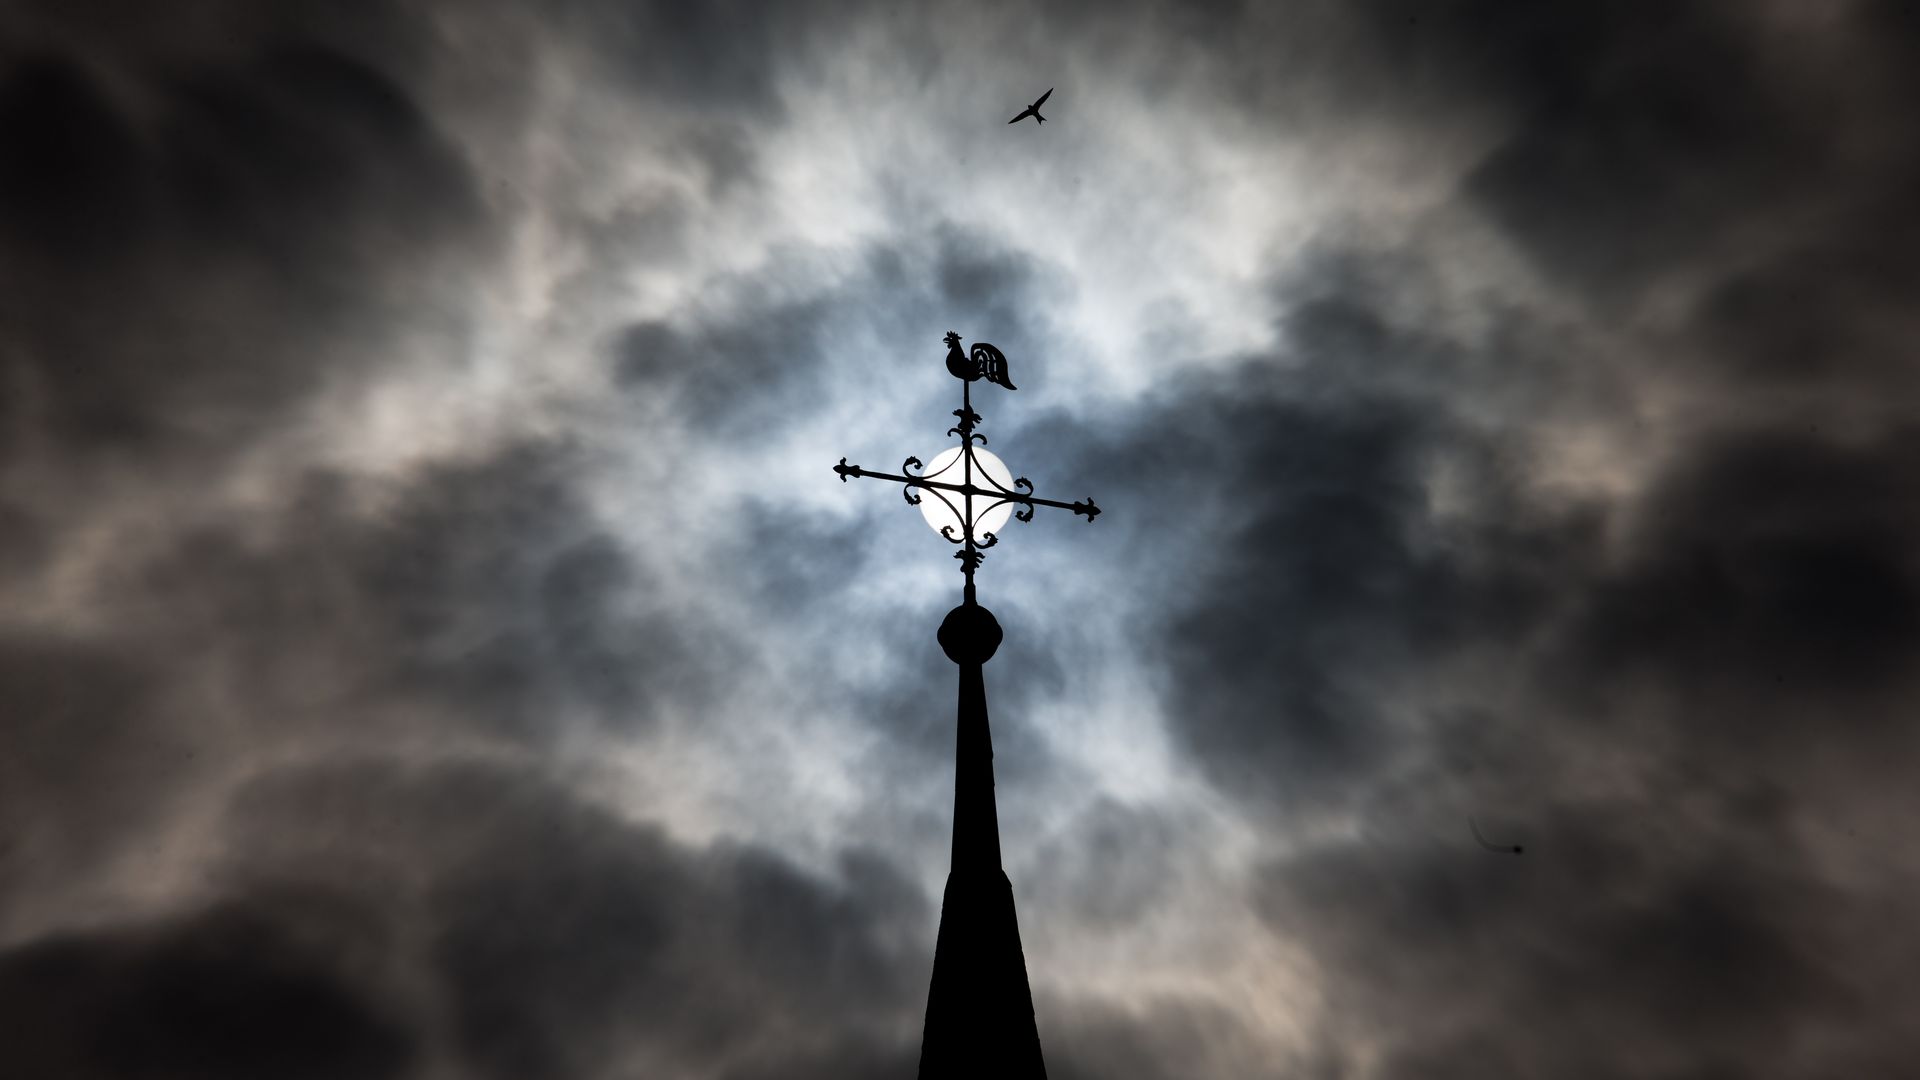 Weather cock and cross on top of a Catholic church in Germany, amid dark storm clouds.